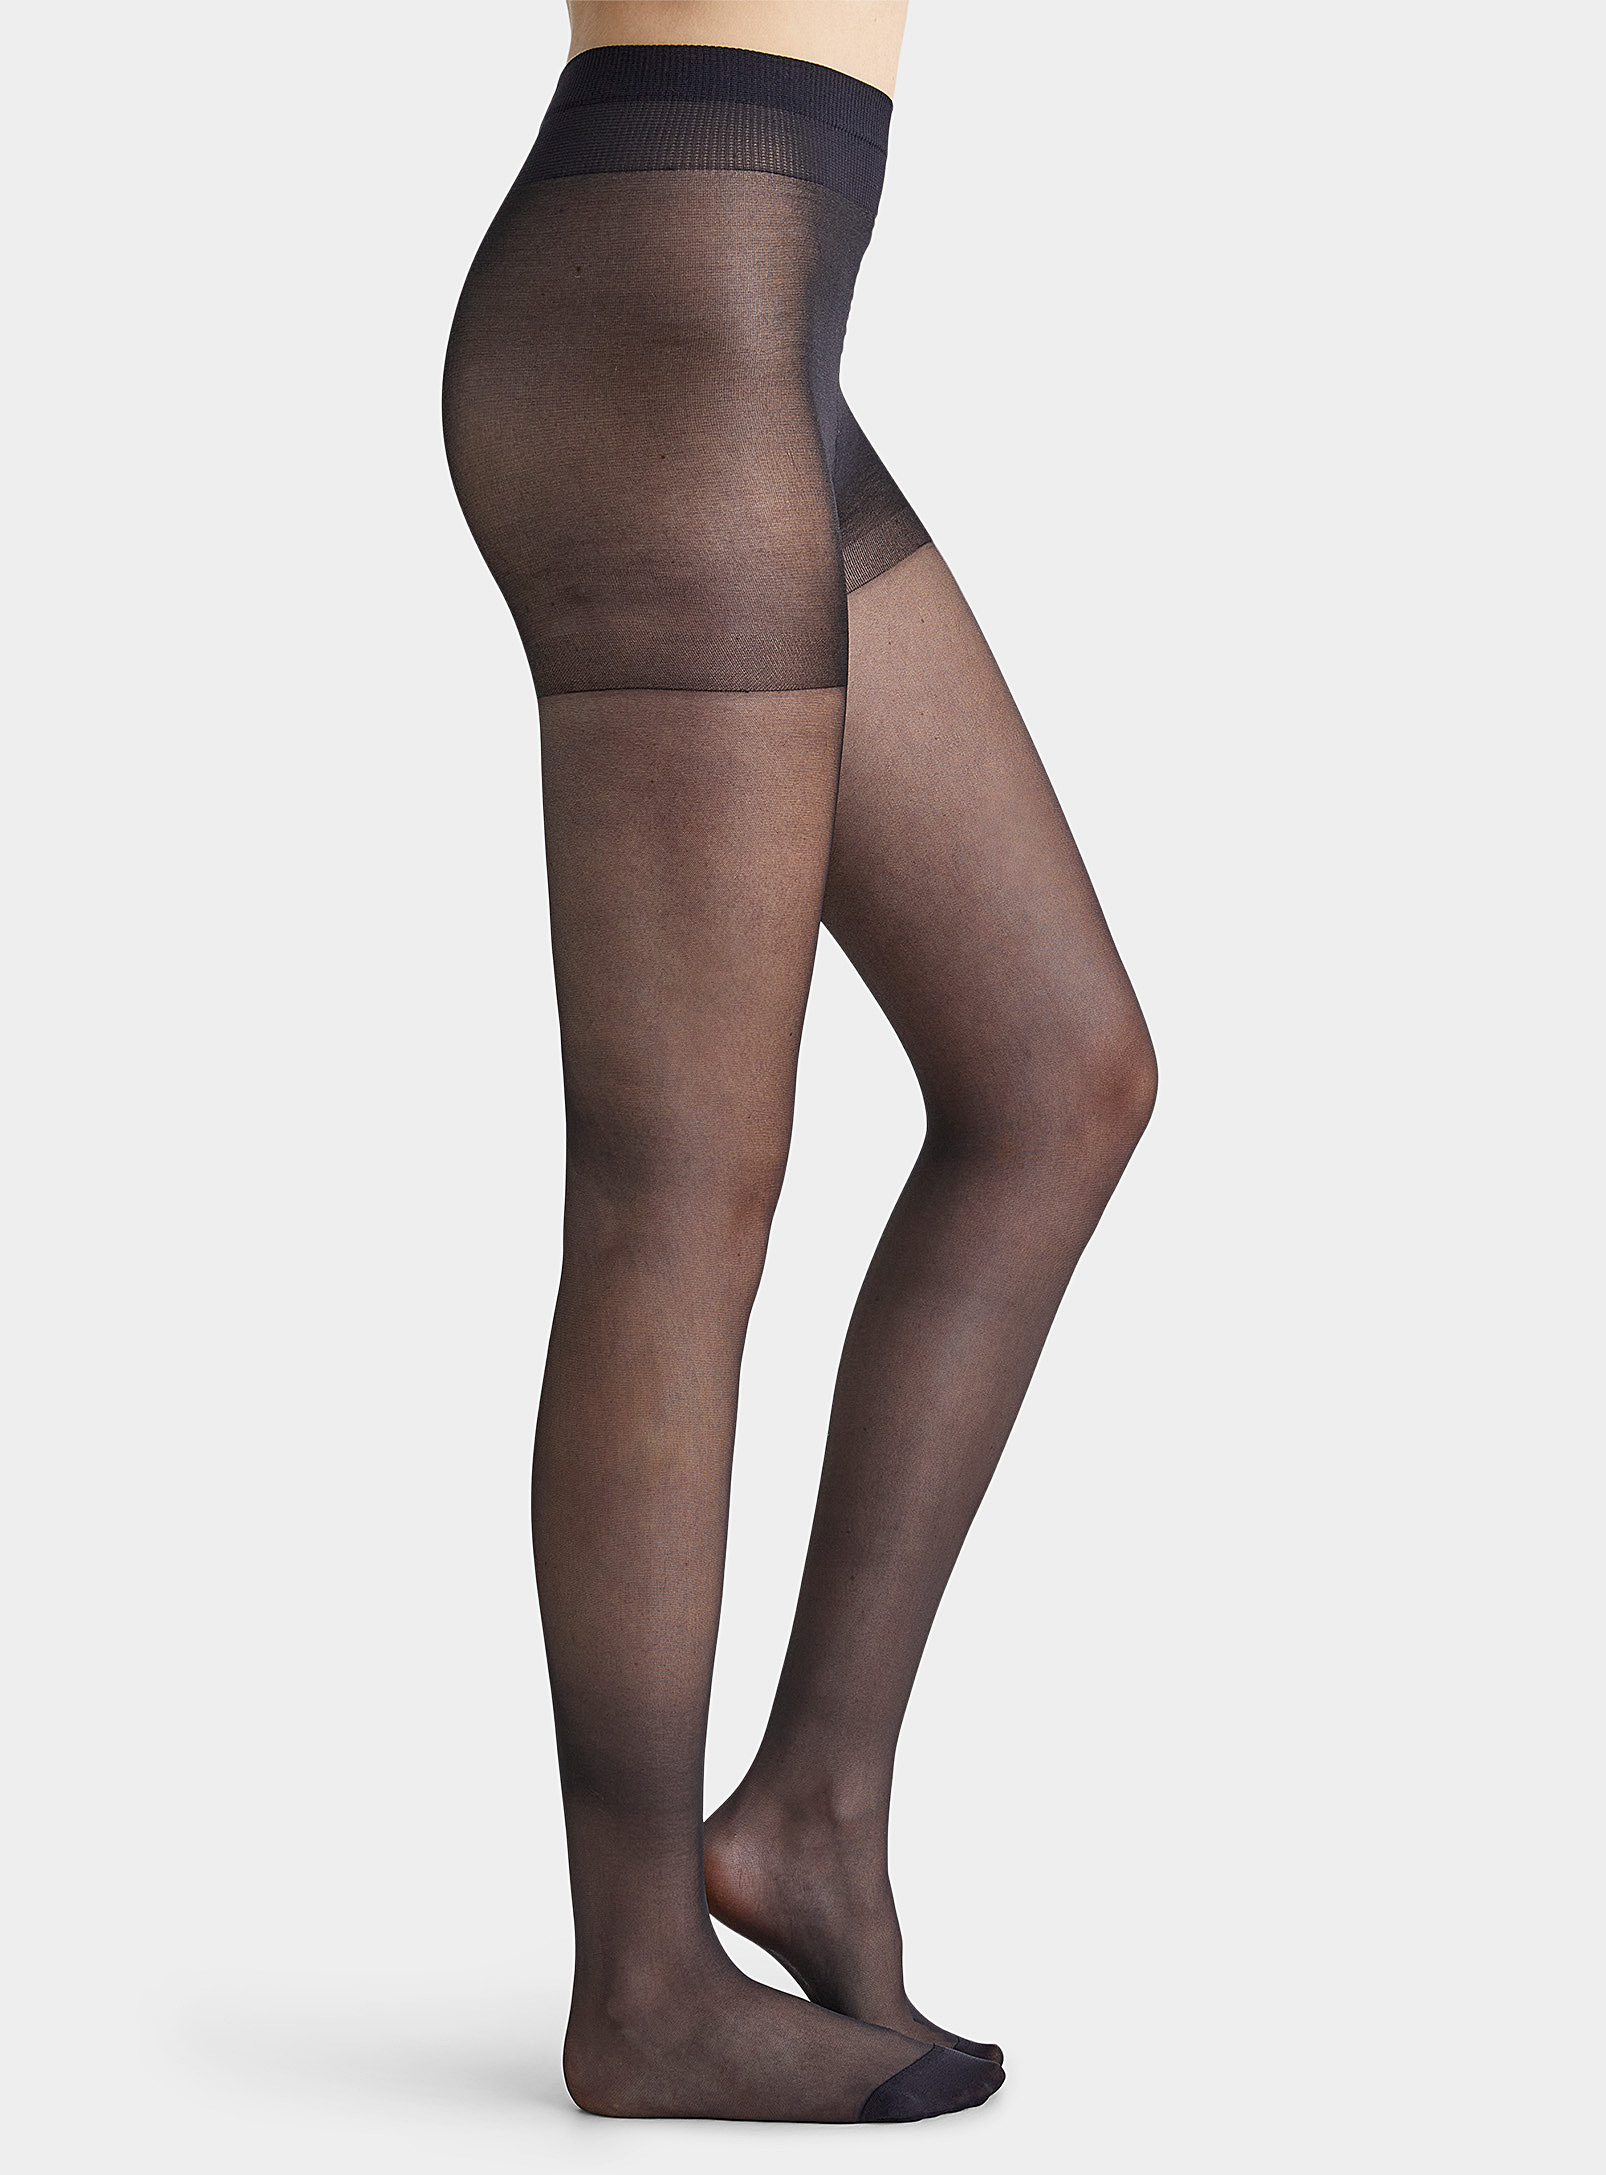 Energizers Graded Compression Sheer Pantyhose In Black